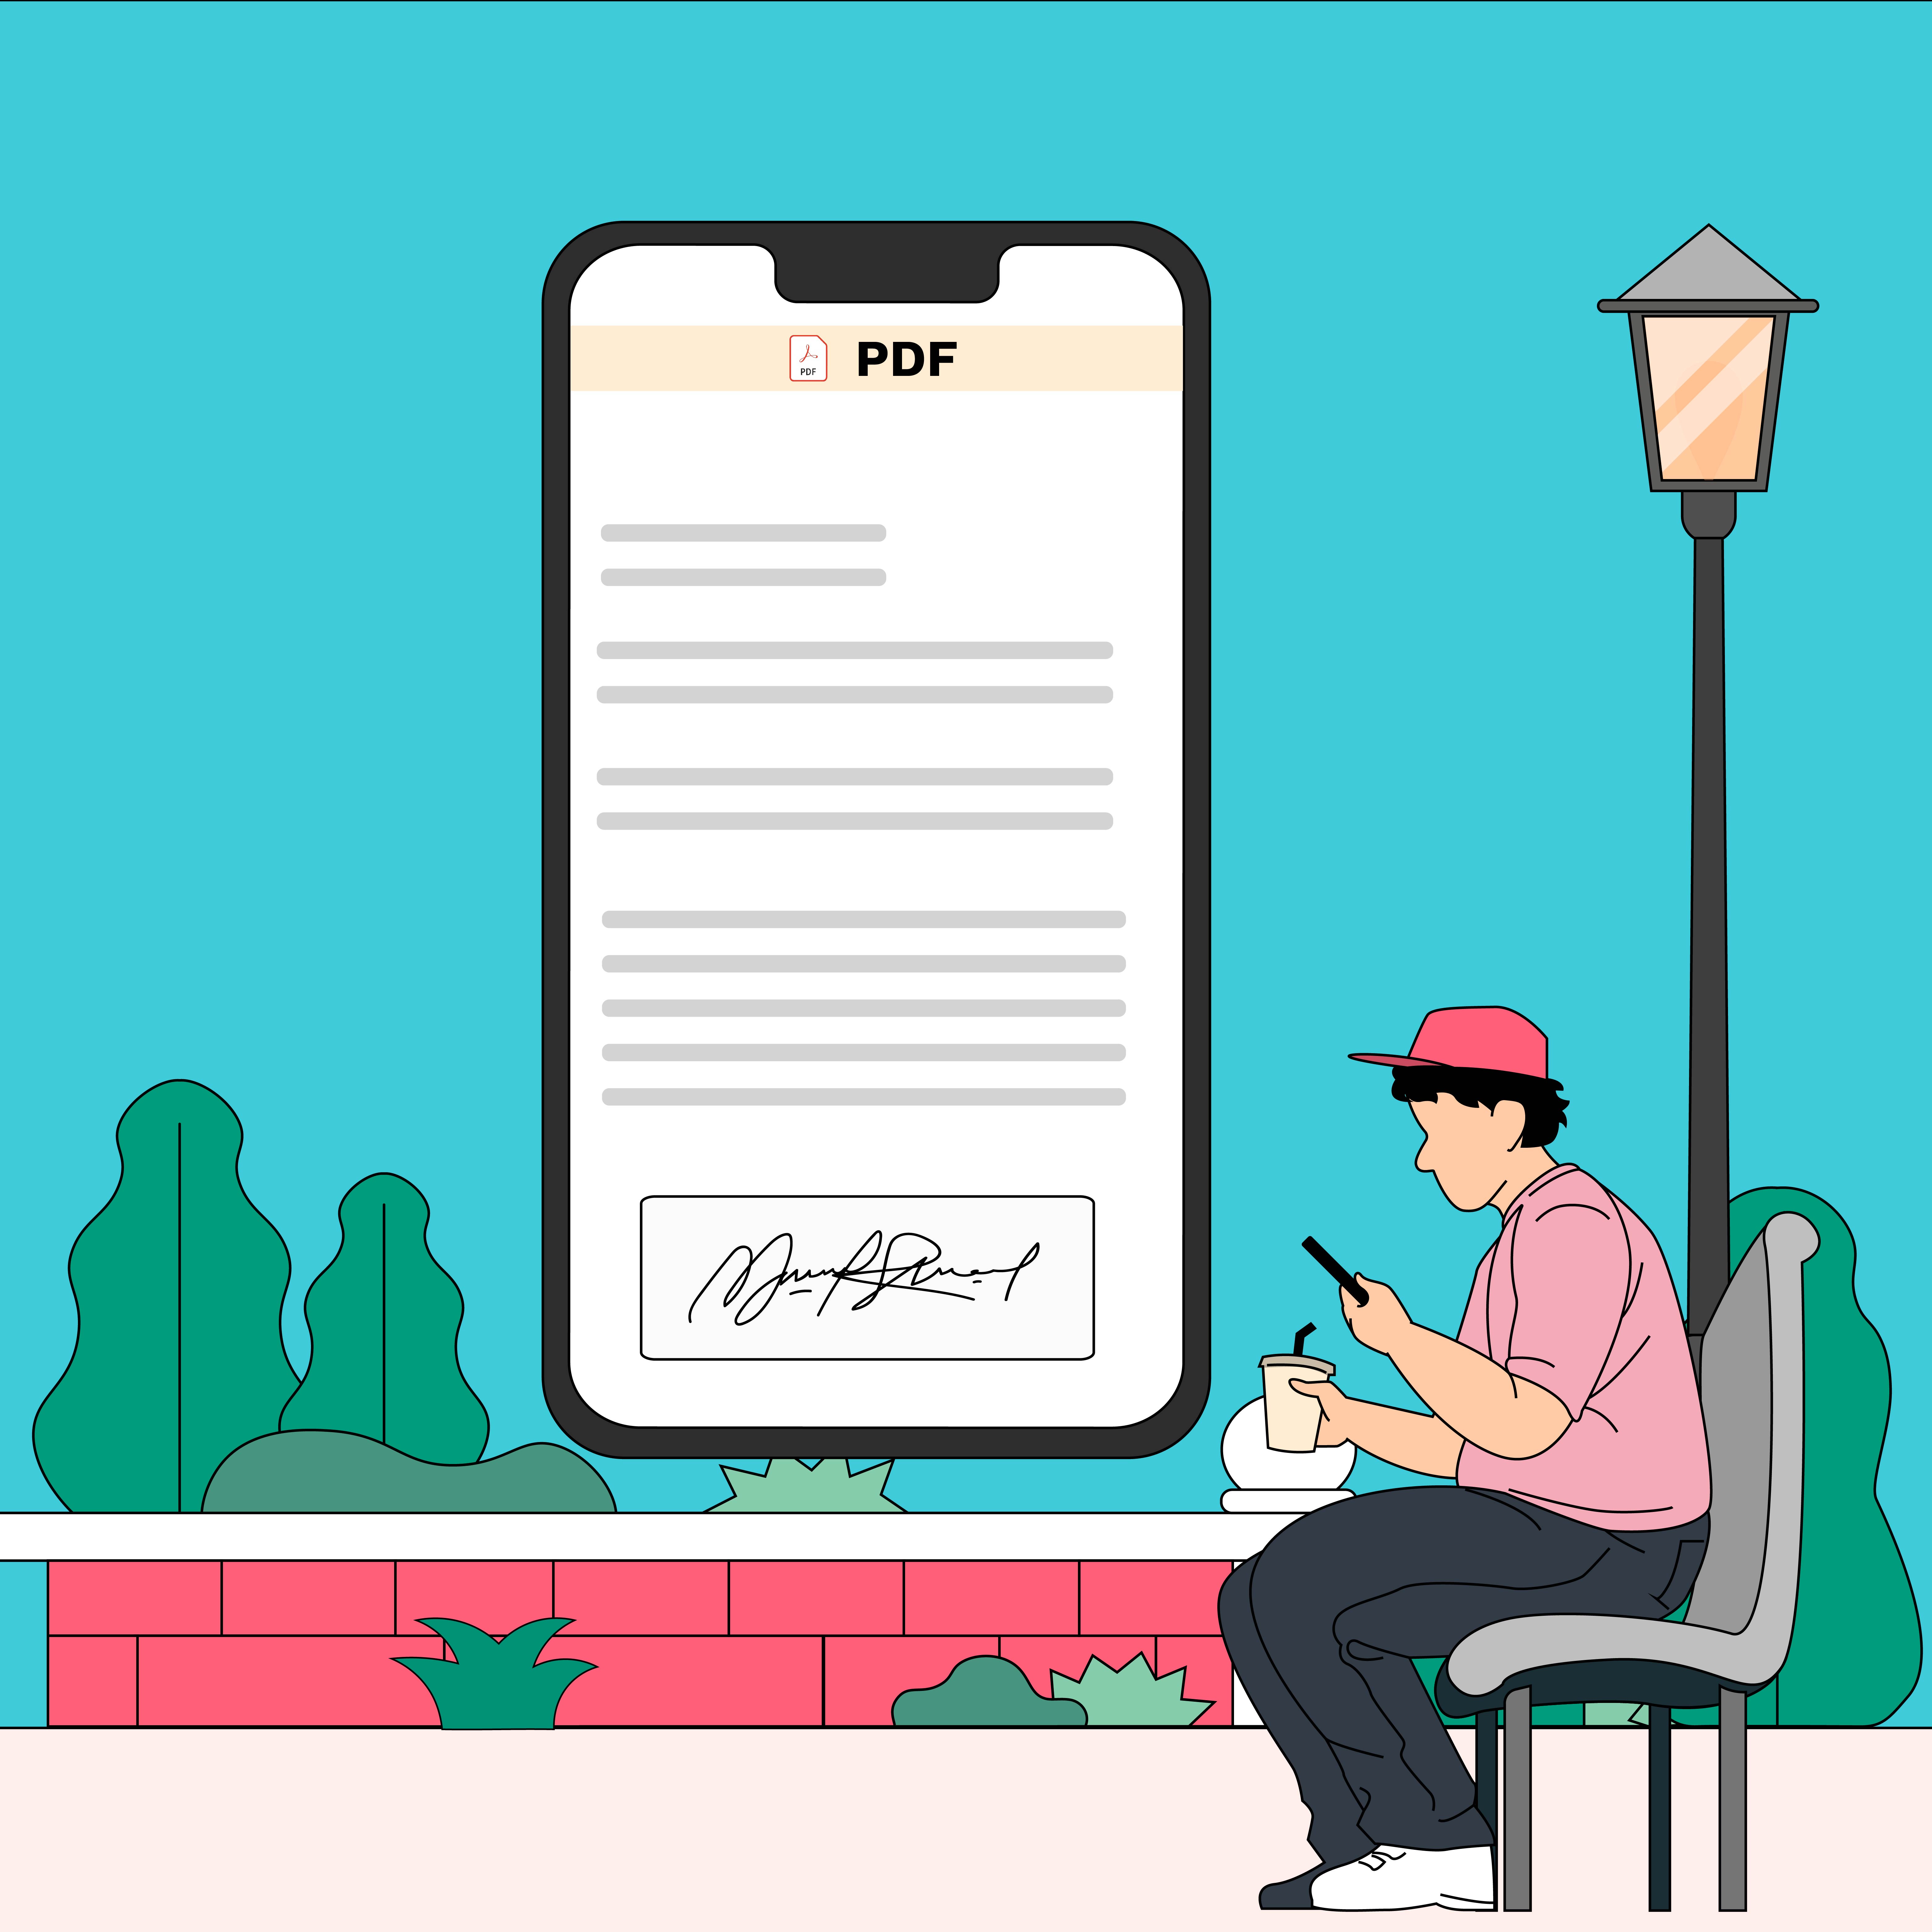 Sign PDFs yourself or request signatures on PDF documents using any PDF editor software.